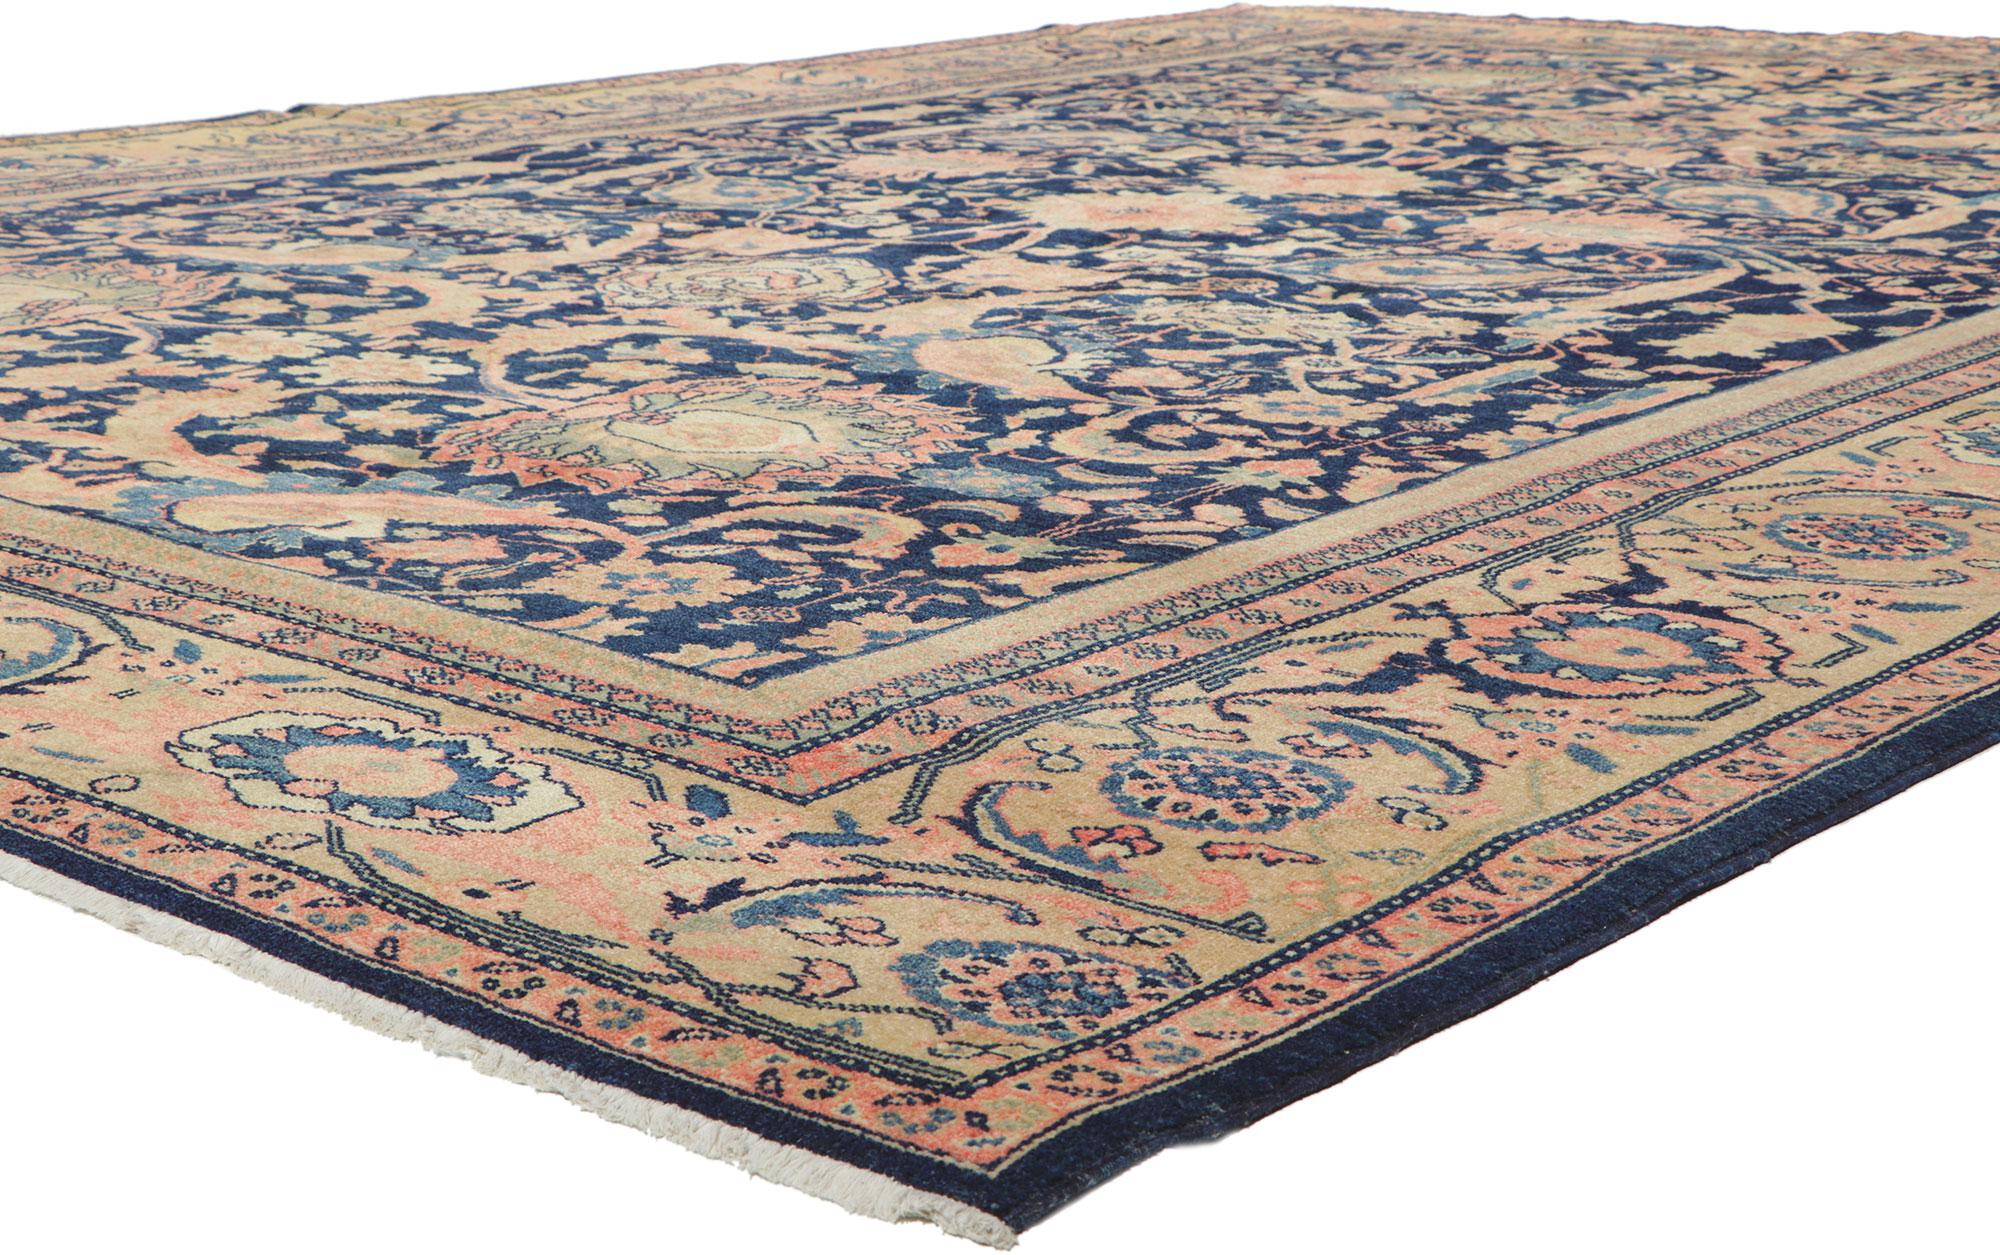 78350 Vintage Persian Mahal Rug, 11'09 x 16'04.
Sophisticated serenity meets Elizabethan elegance in this hand knotted wool vintage Persian Mahal rug. Oh, the magesty of this woven wonder, a masterpiece of Persian enchantmennet. This vintage Persian